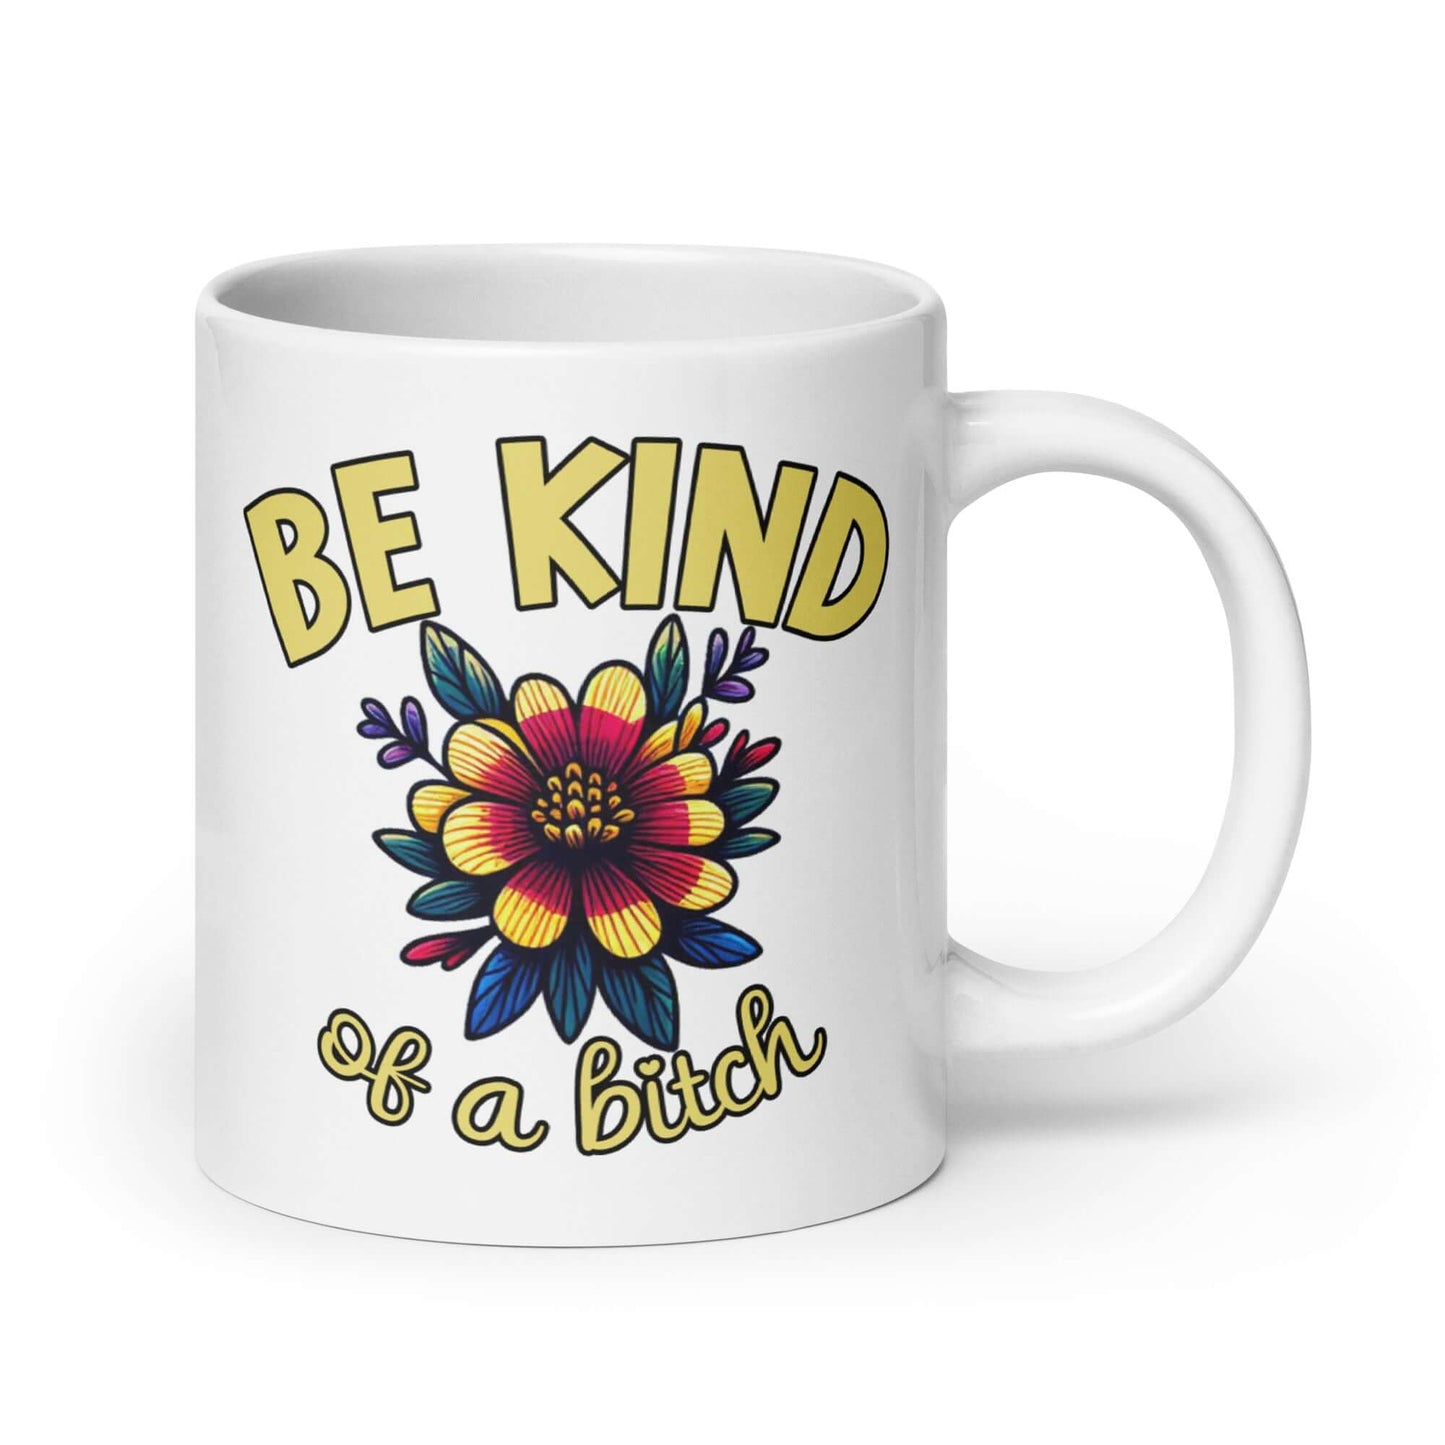 White ceramic coffee mug with an image of a flower and the words Be kind above the flower in bold block font. The words Of a bitch are smaller in script font under the flower. The design is printed on both sides of the mug.